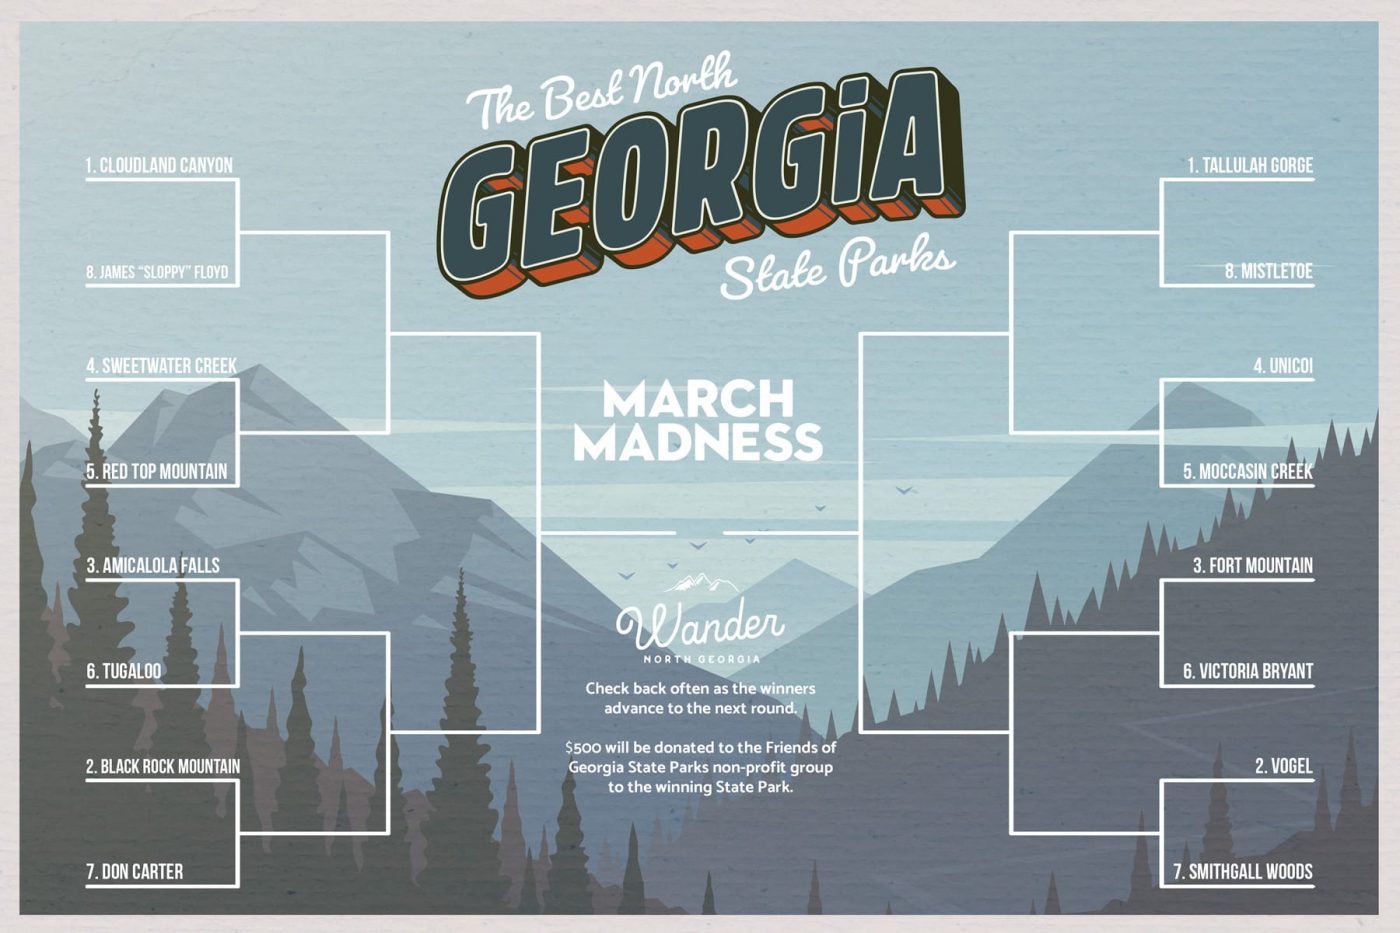 graphic_stateparks_marchmadness-p410p1pi6dh29ehkqifph2b2d8d0idt0lfwy2koj1u